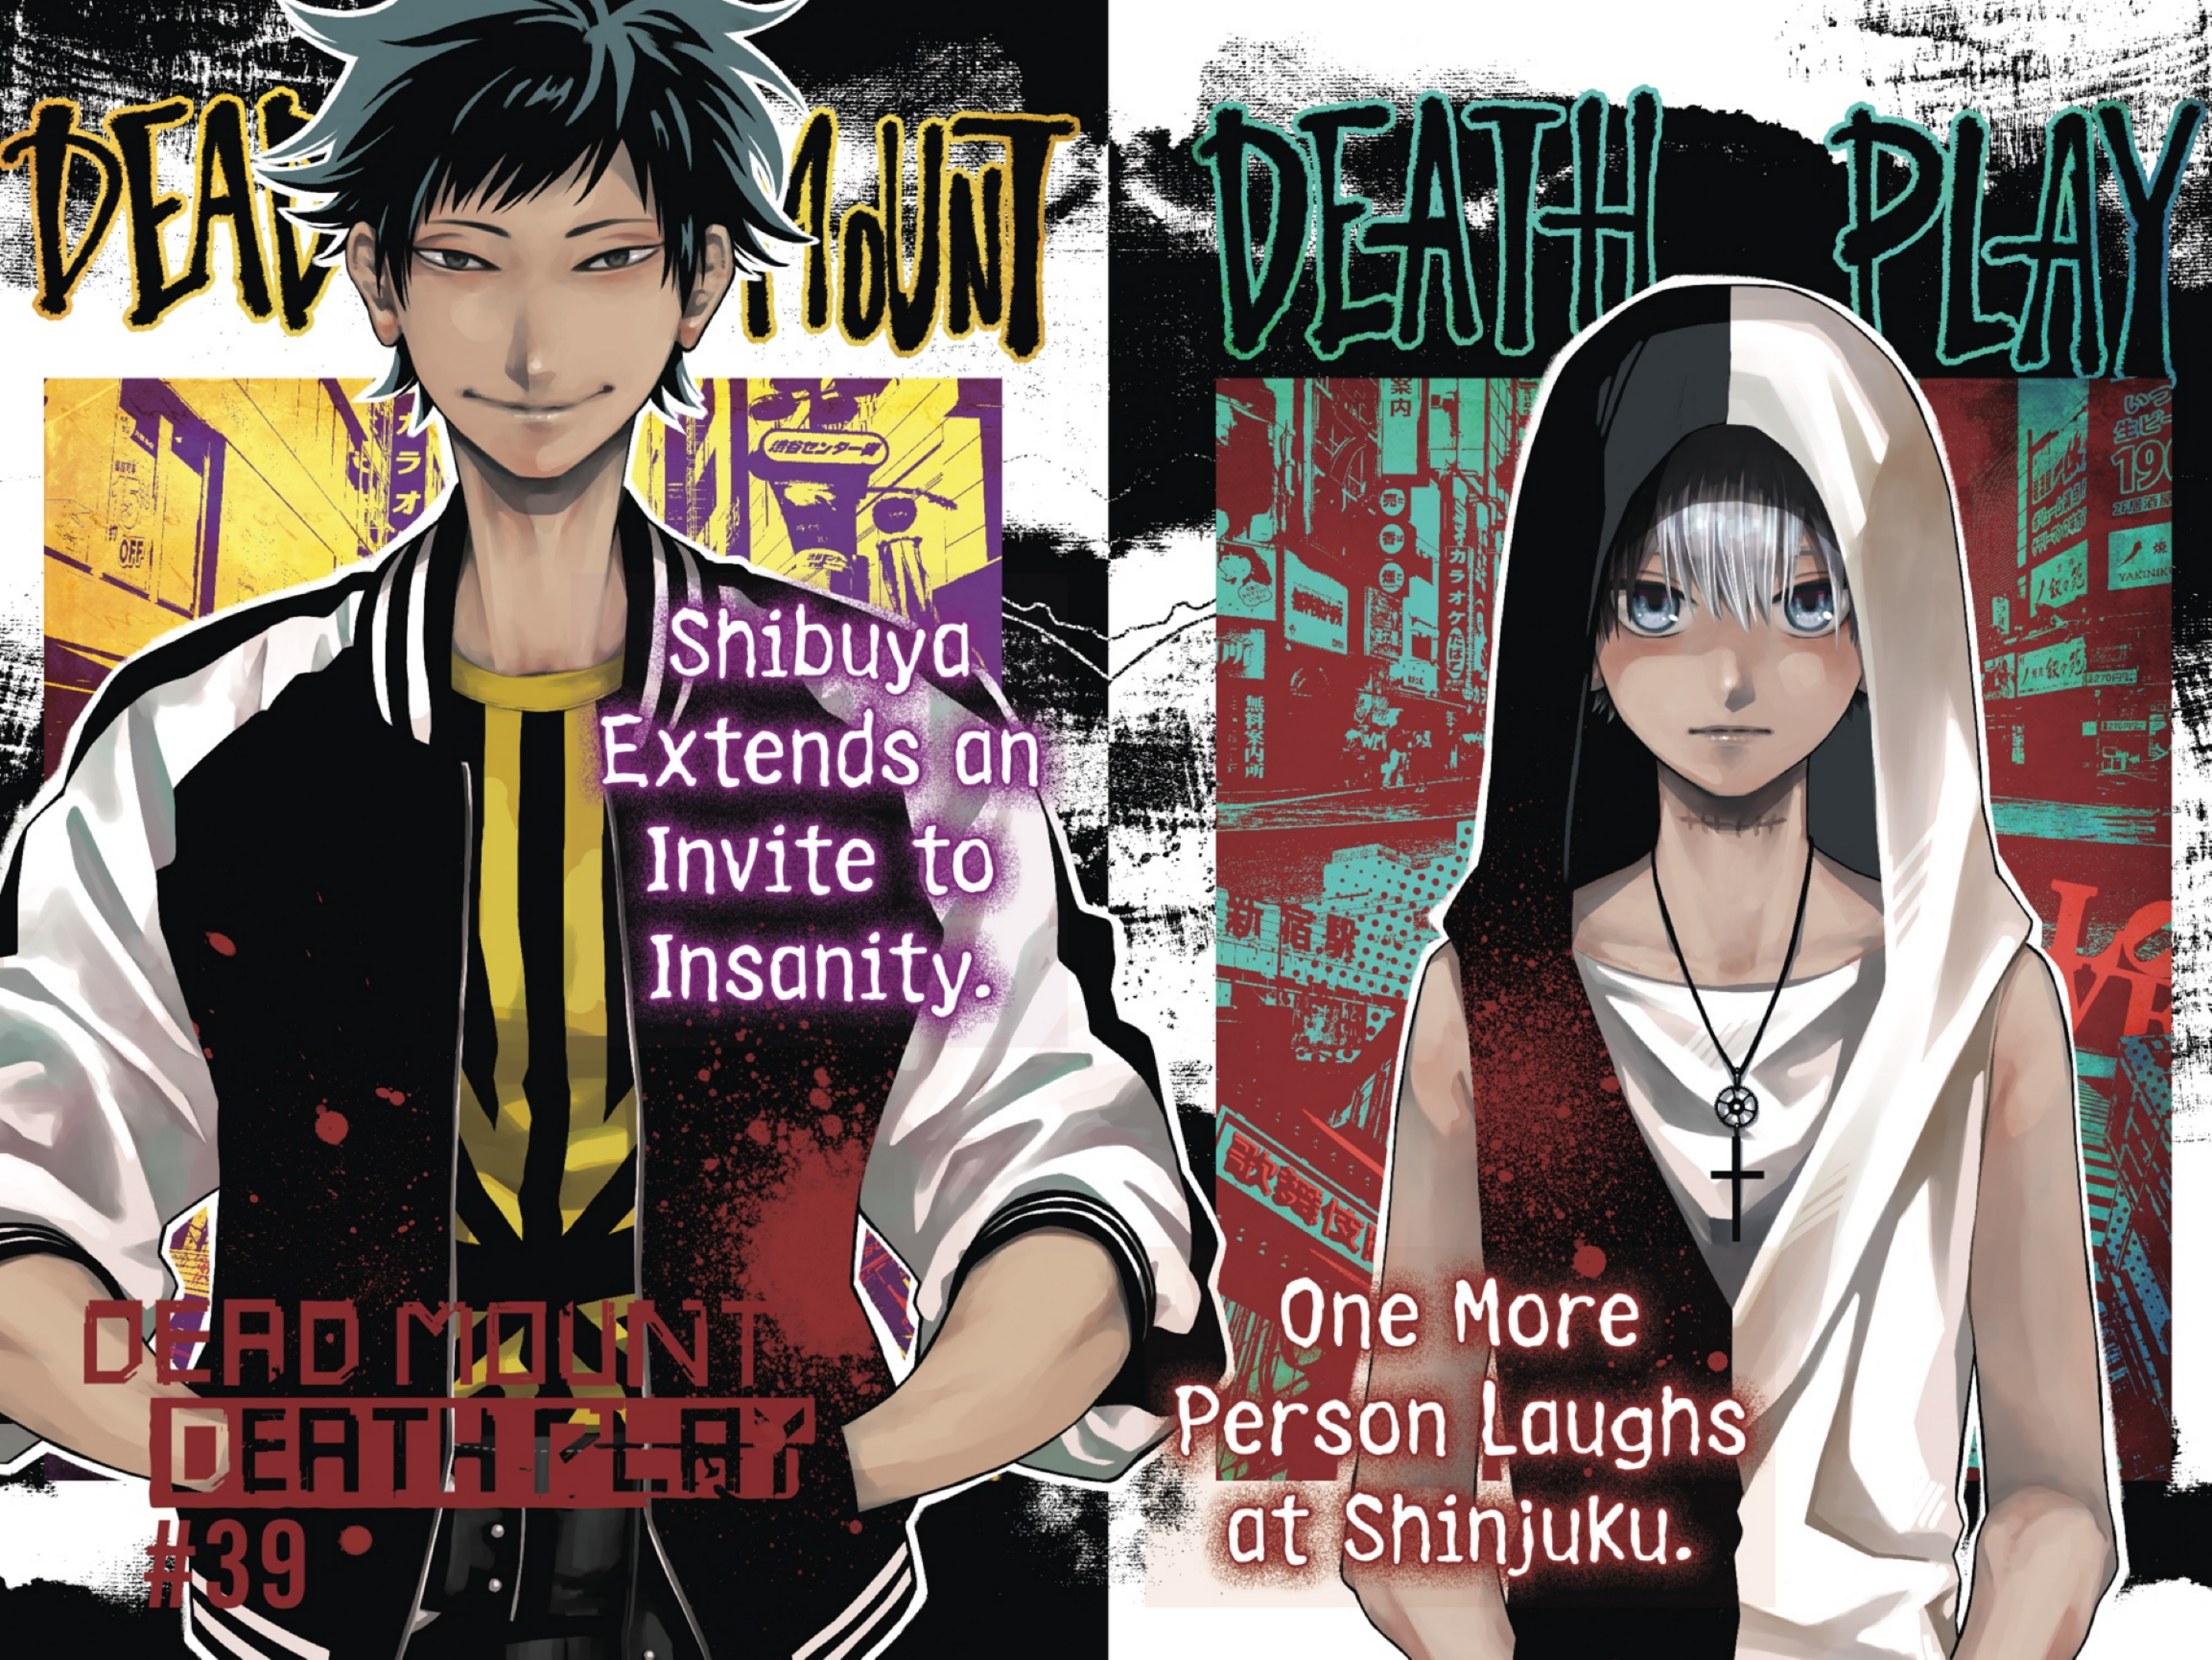 Dead Mount Death Play manga: Where to read, what to expect, and more